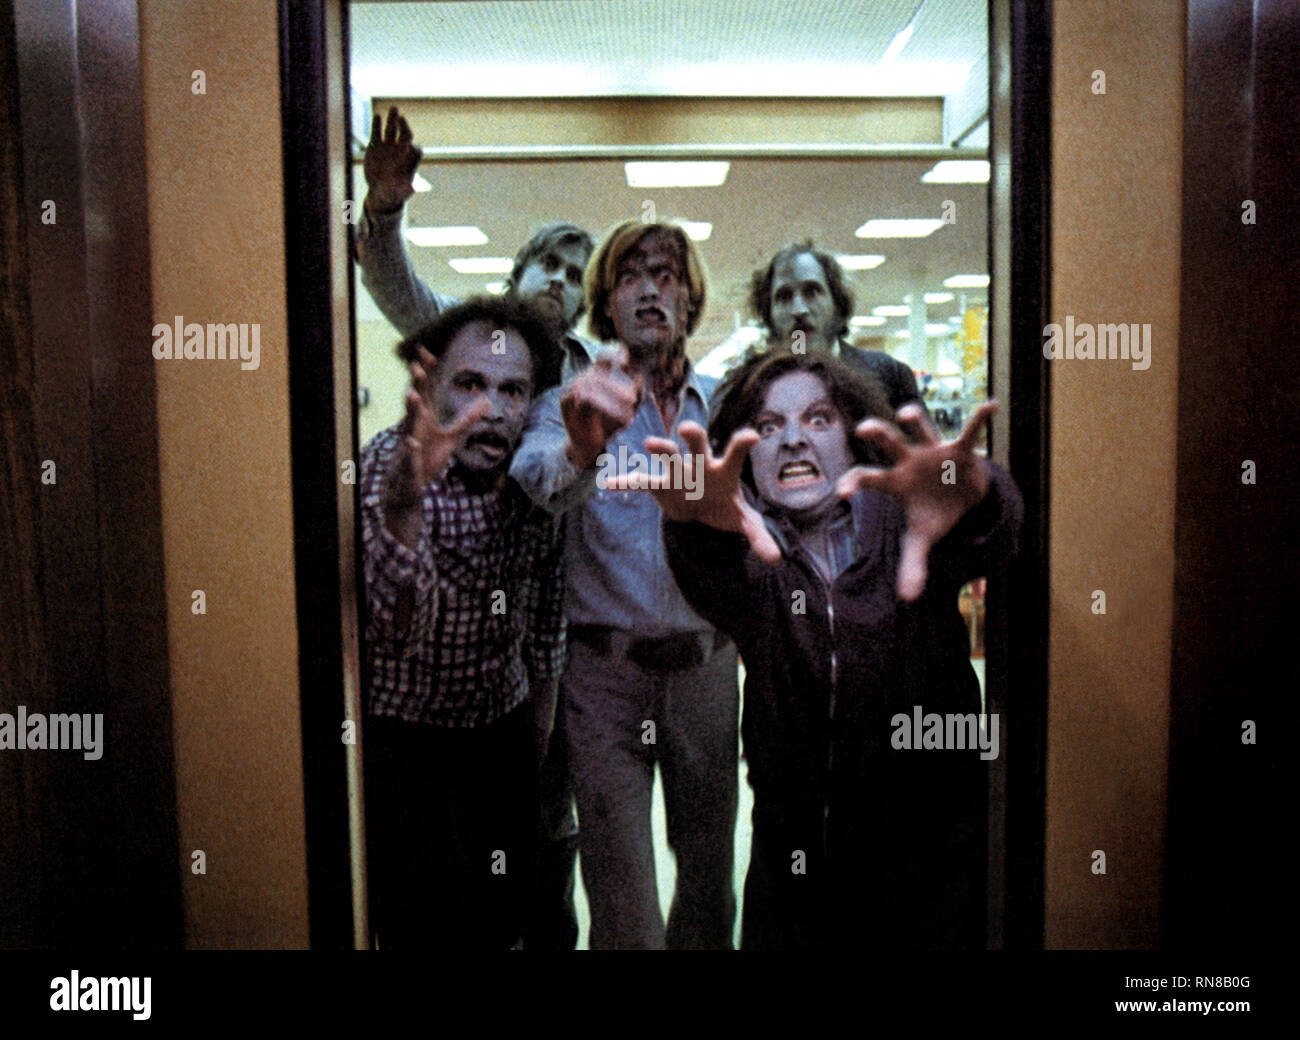 ZOMBIES, DAWN OF THE DEAD, 1978 Stock Photo